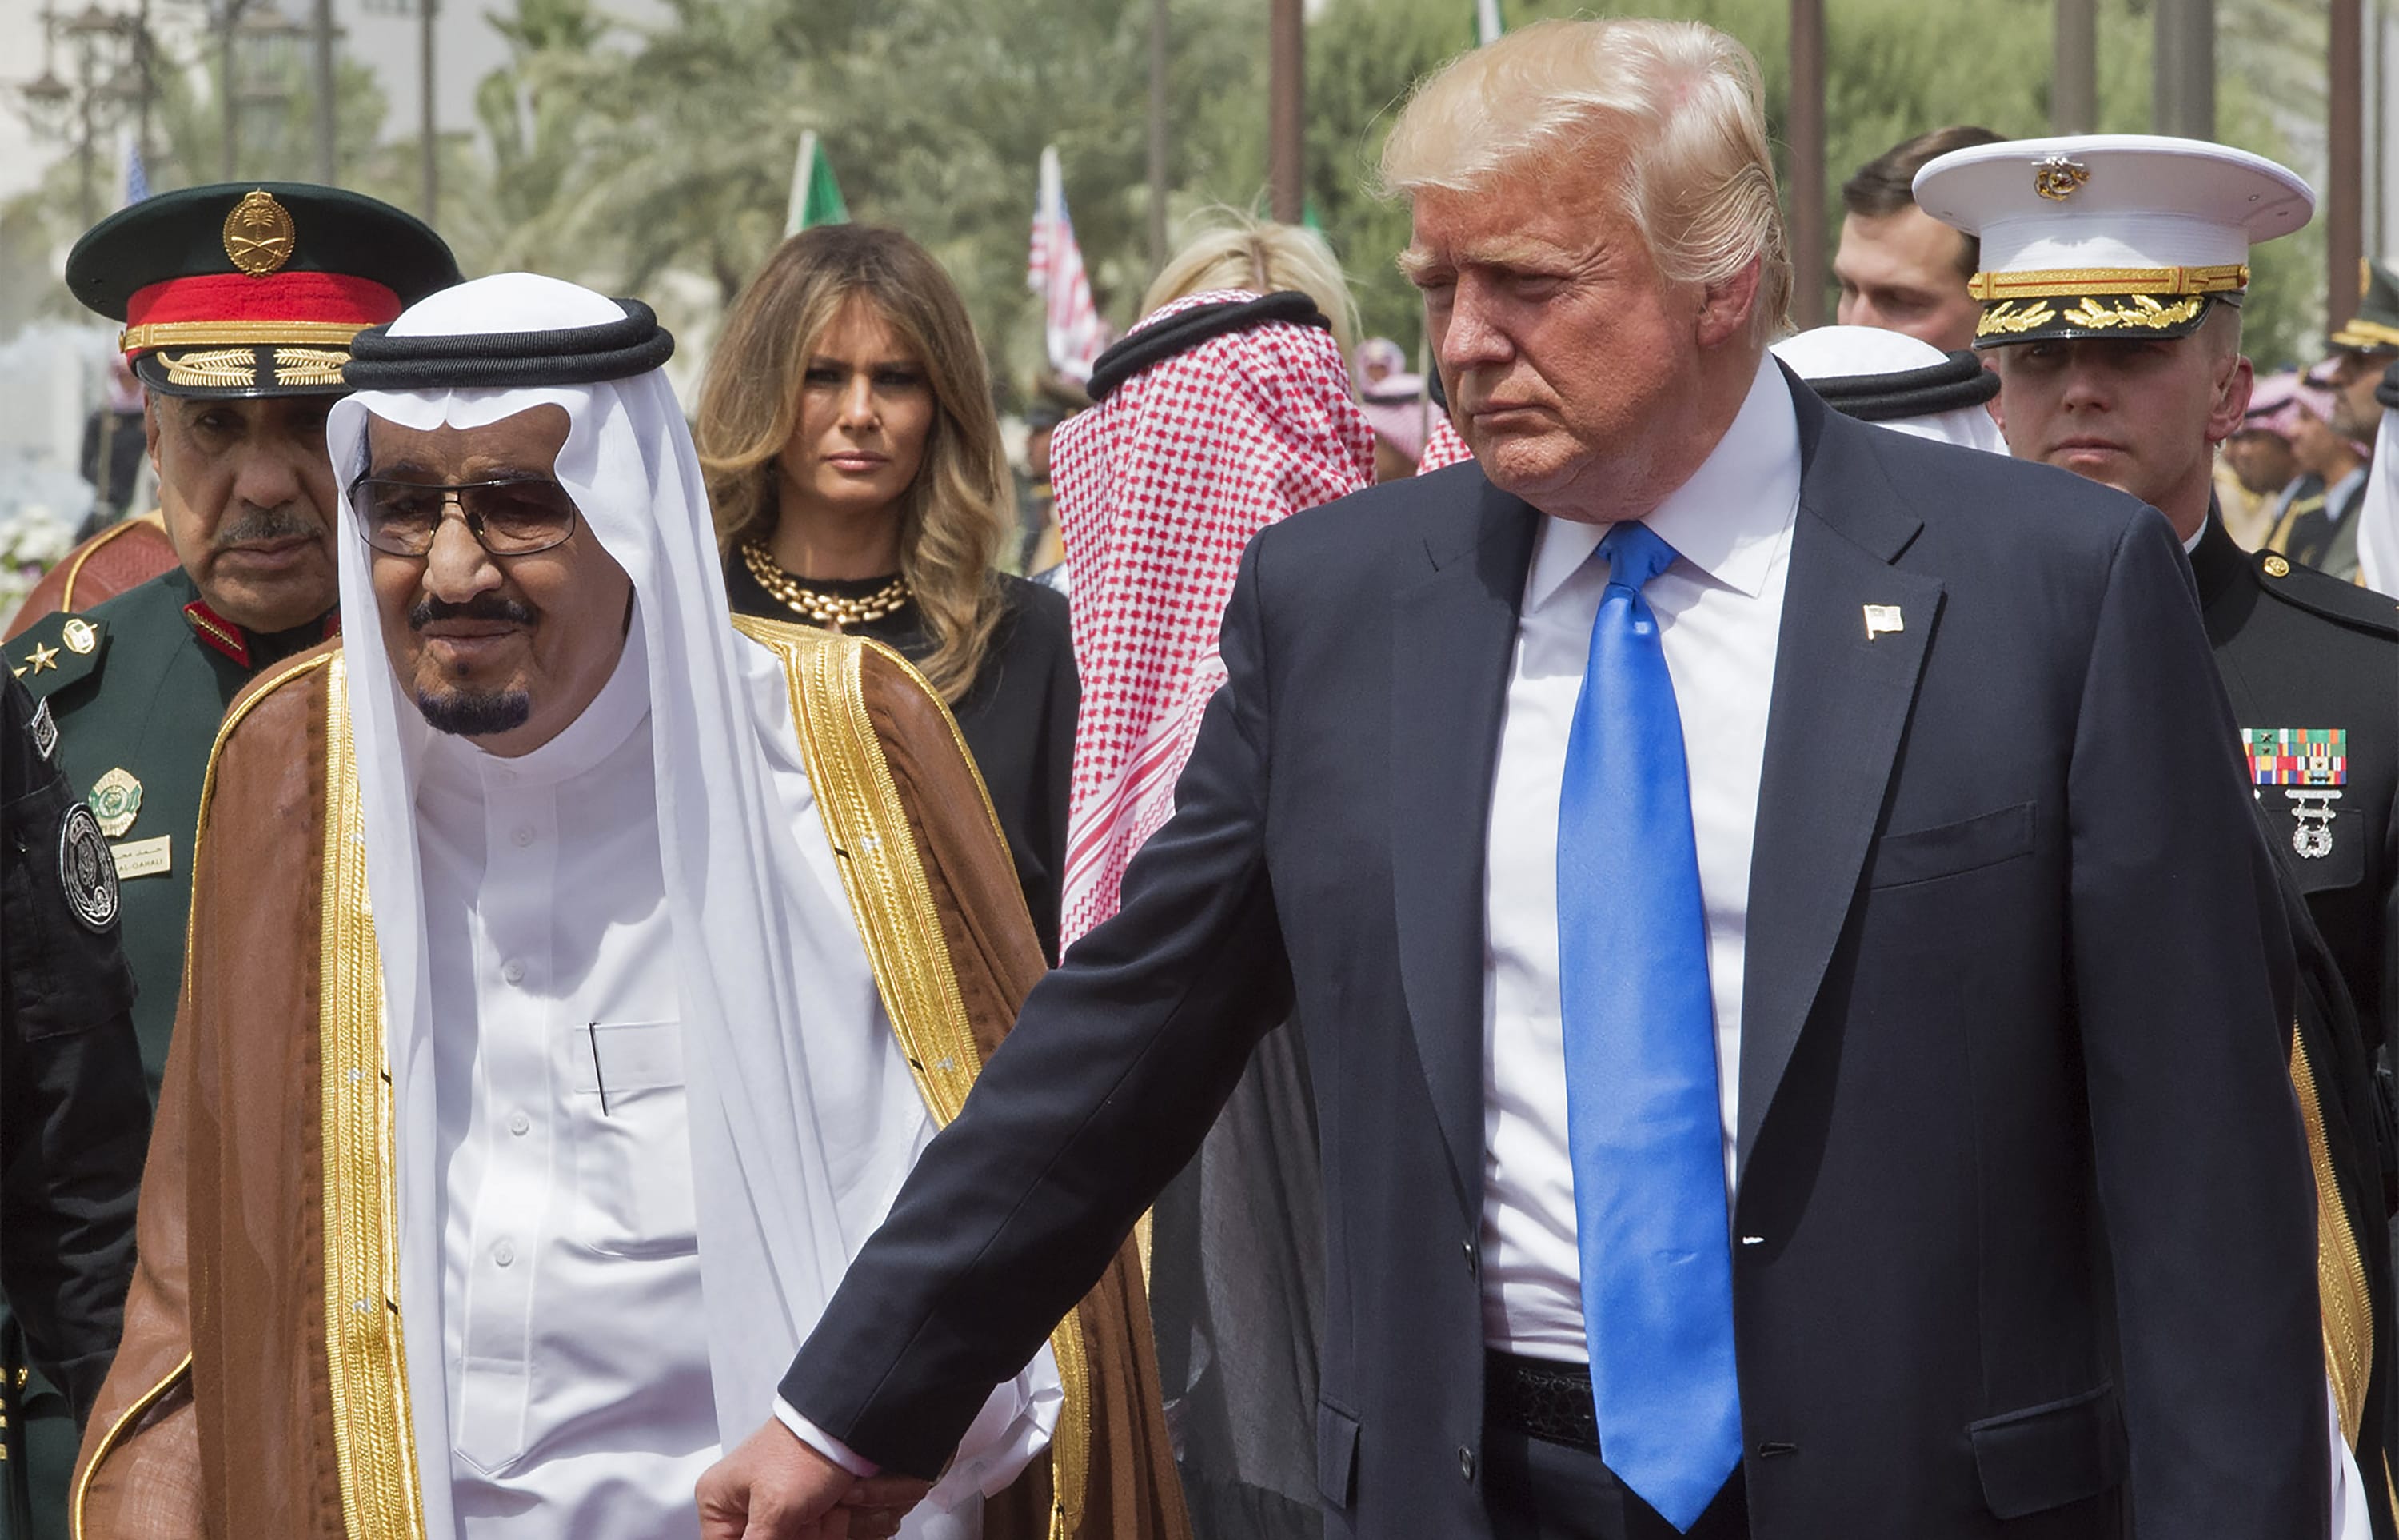 US President Donald Trump holding the hand of Saudi Arabia's King Salman bin Abdulaziz al-Saud (L), as First Lady Melania Trump  looks on, as they arrive for a welcoming ceremony at the Saudi Royal Court in Riyadh on 20 May, 2017.